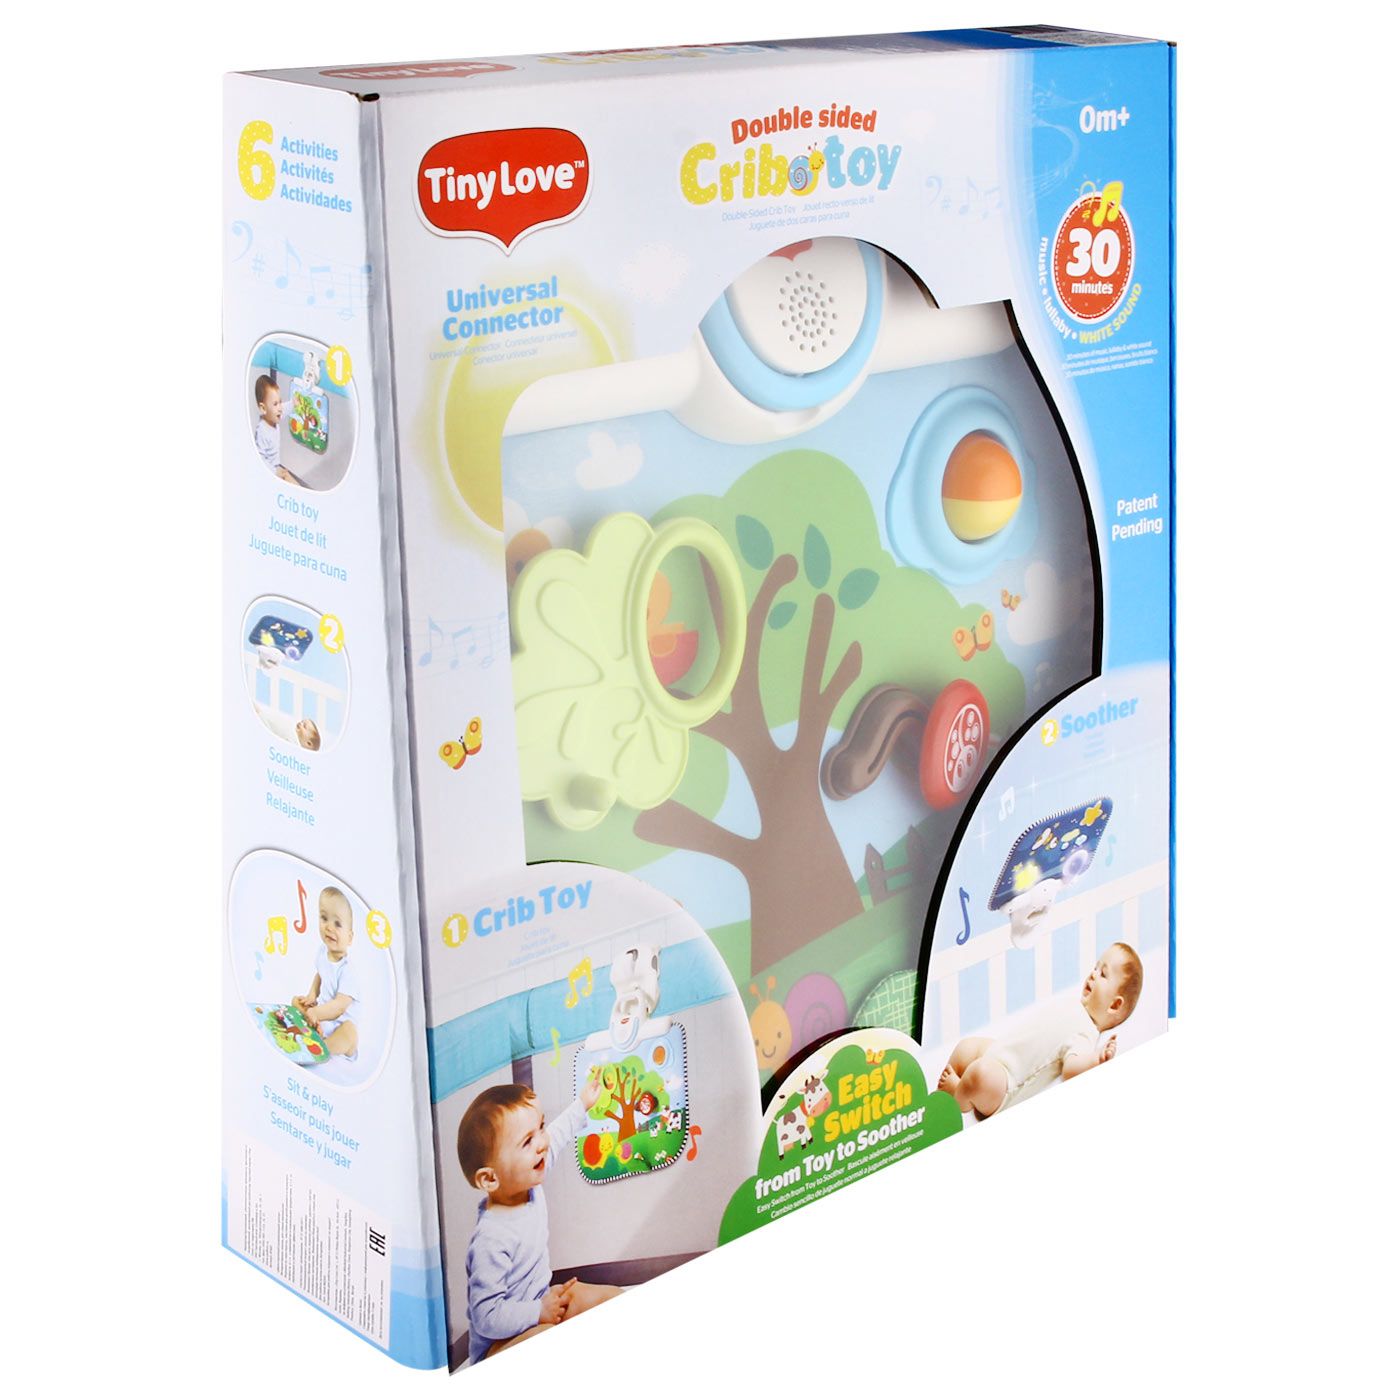 Tiny Love Double Sided Playpen/Crib Toy - 4